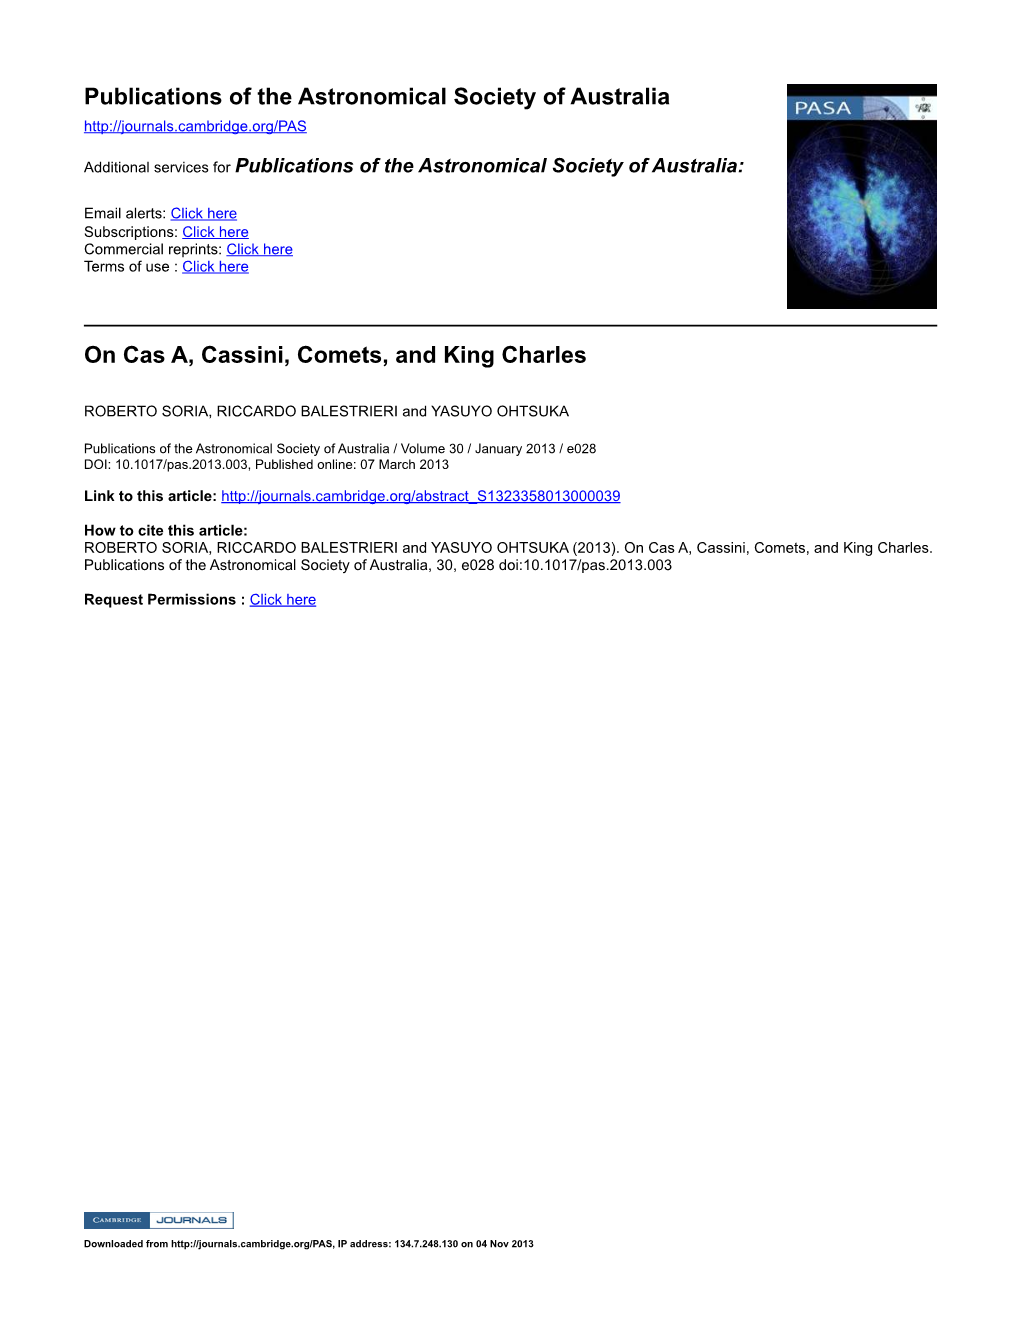 Publications of the Astronomical Society of Australia on Cas A